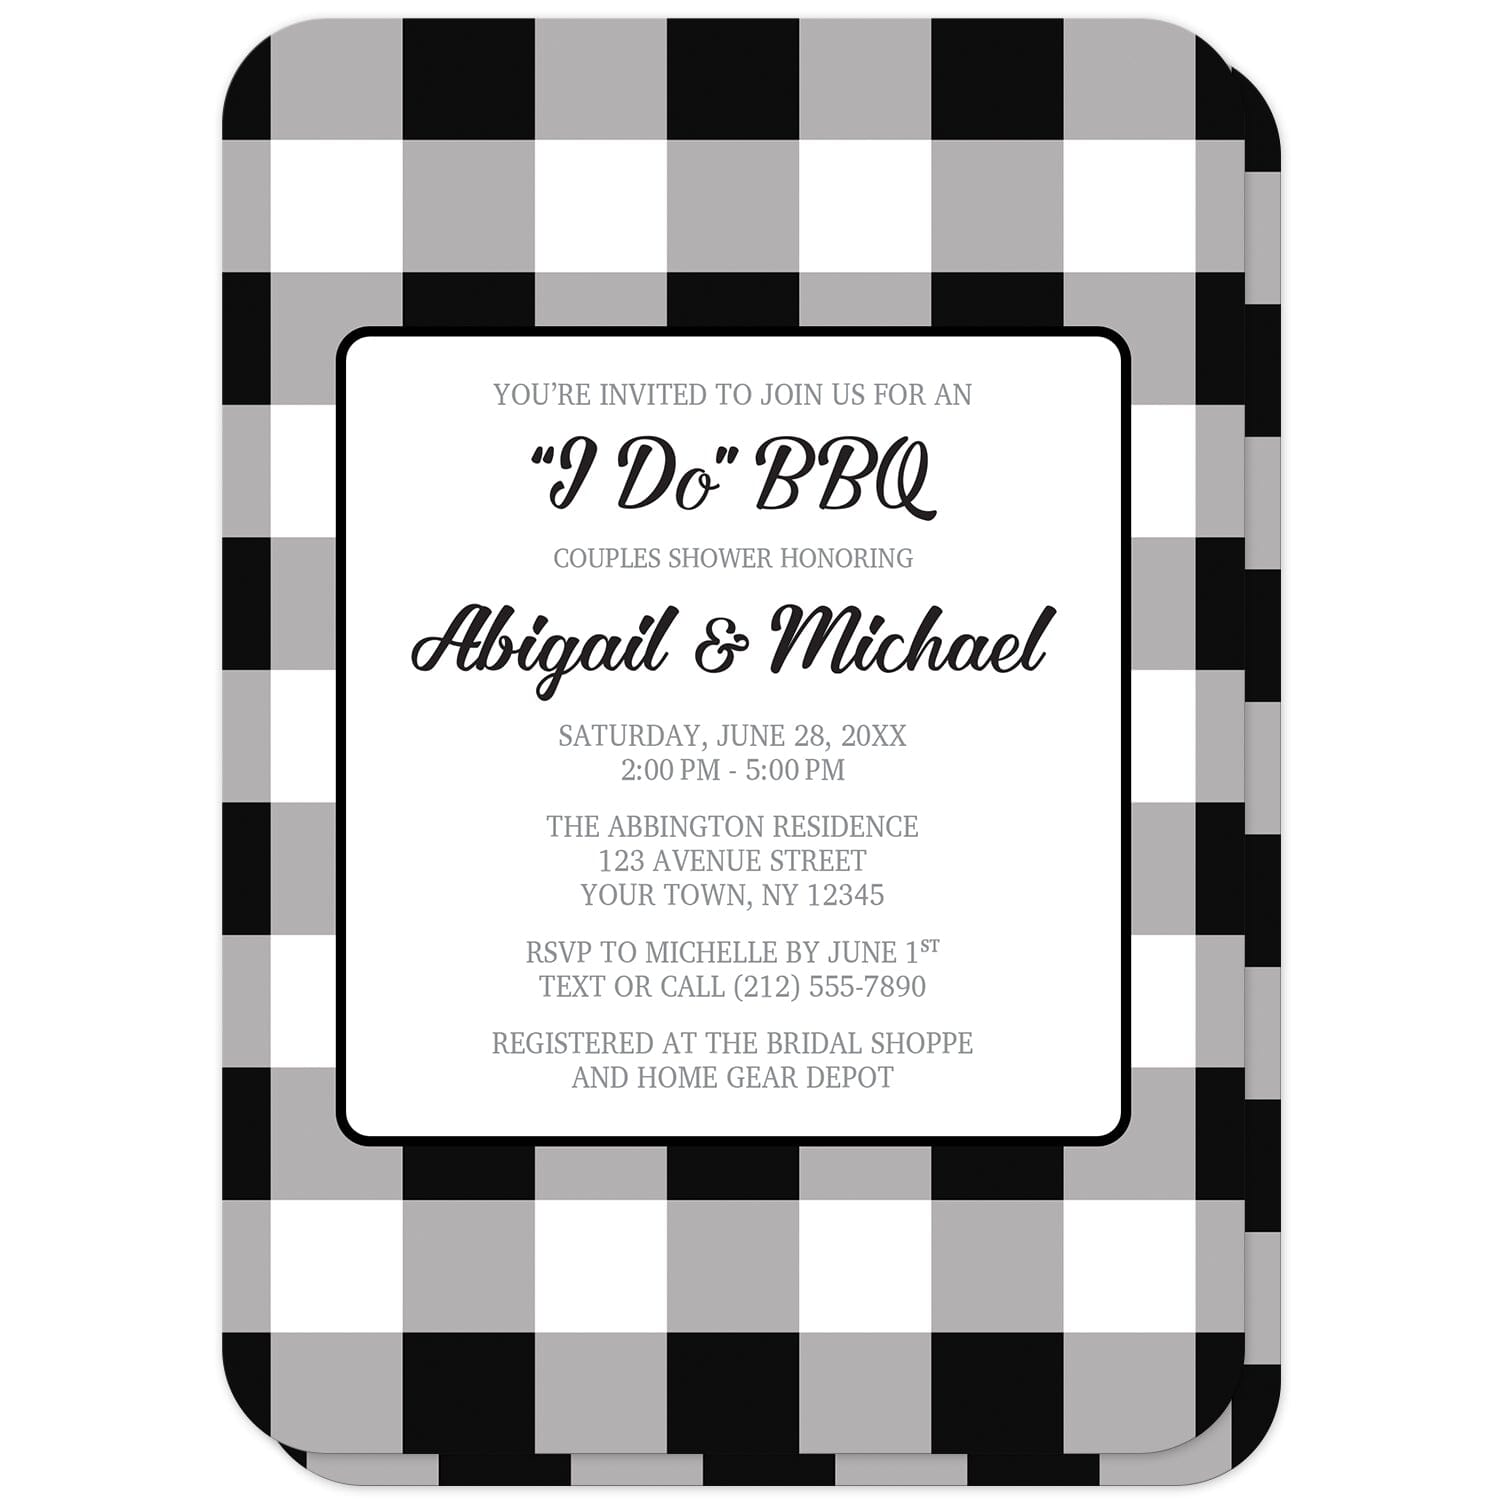 black and white party invitation background